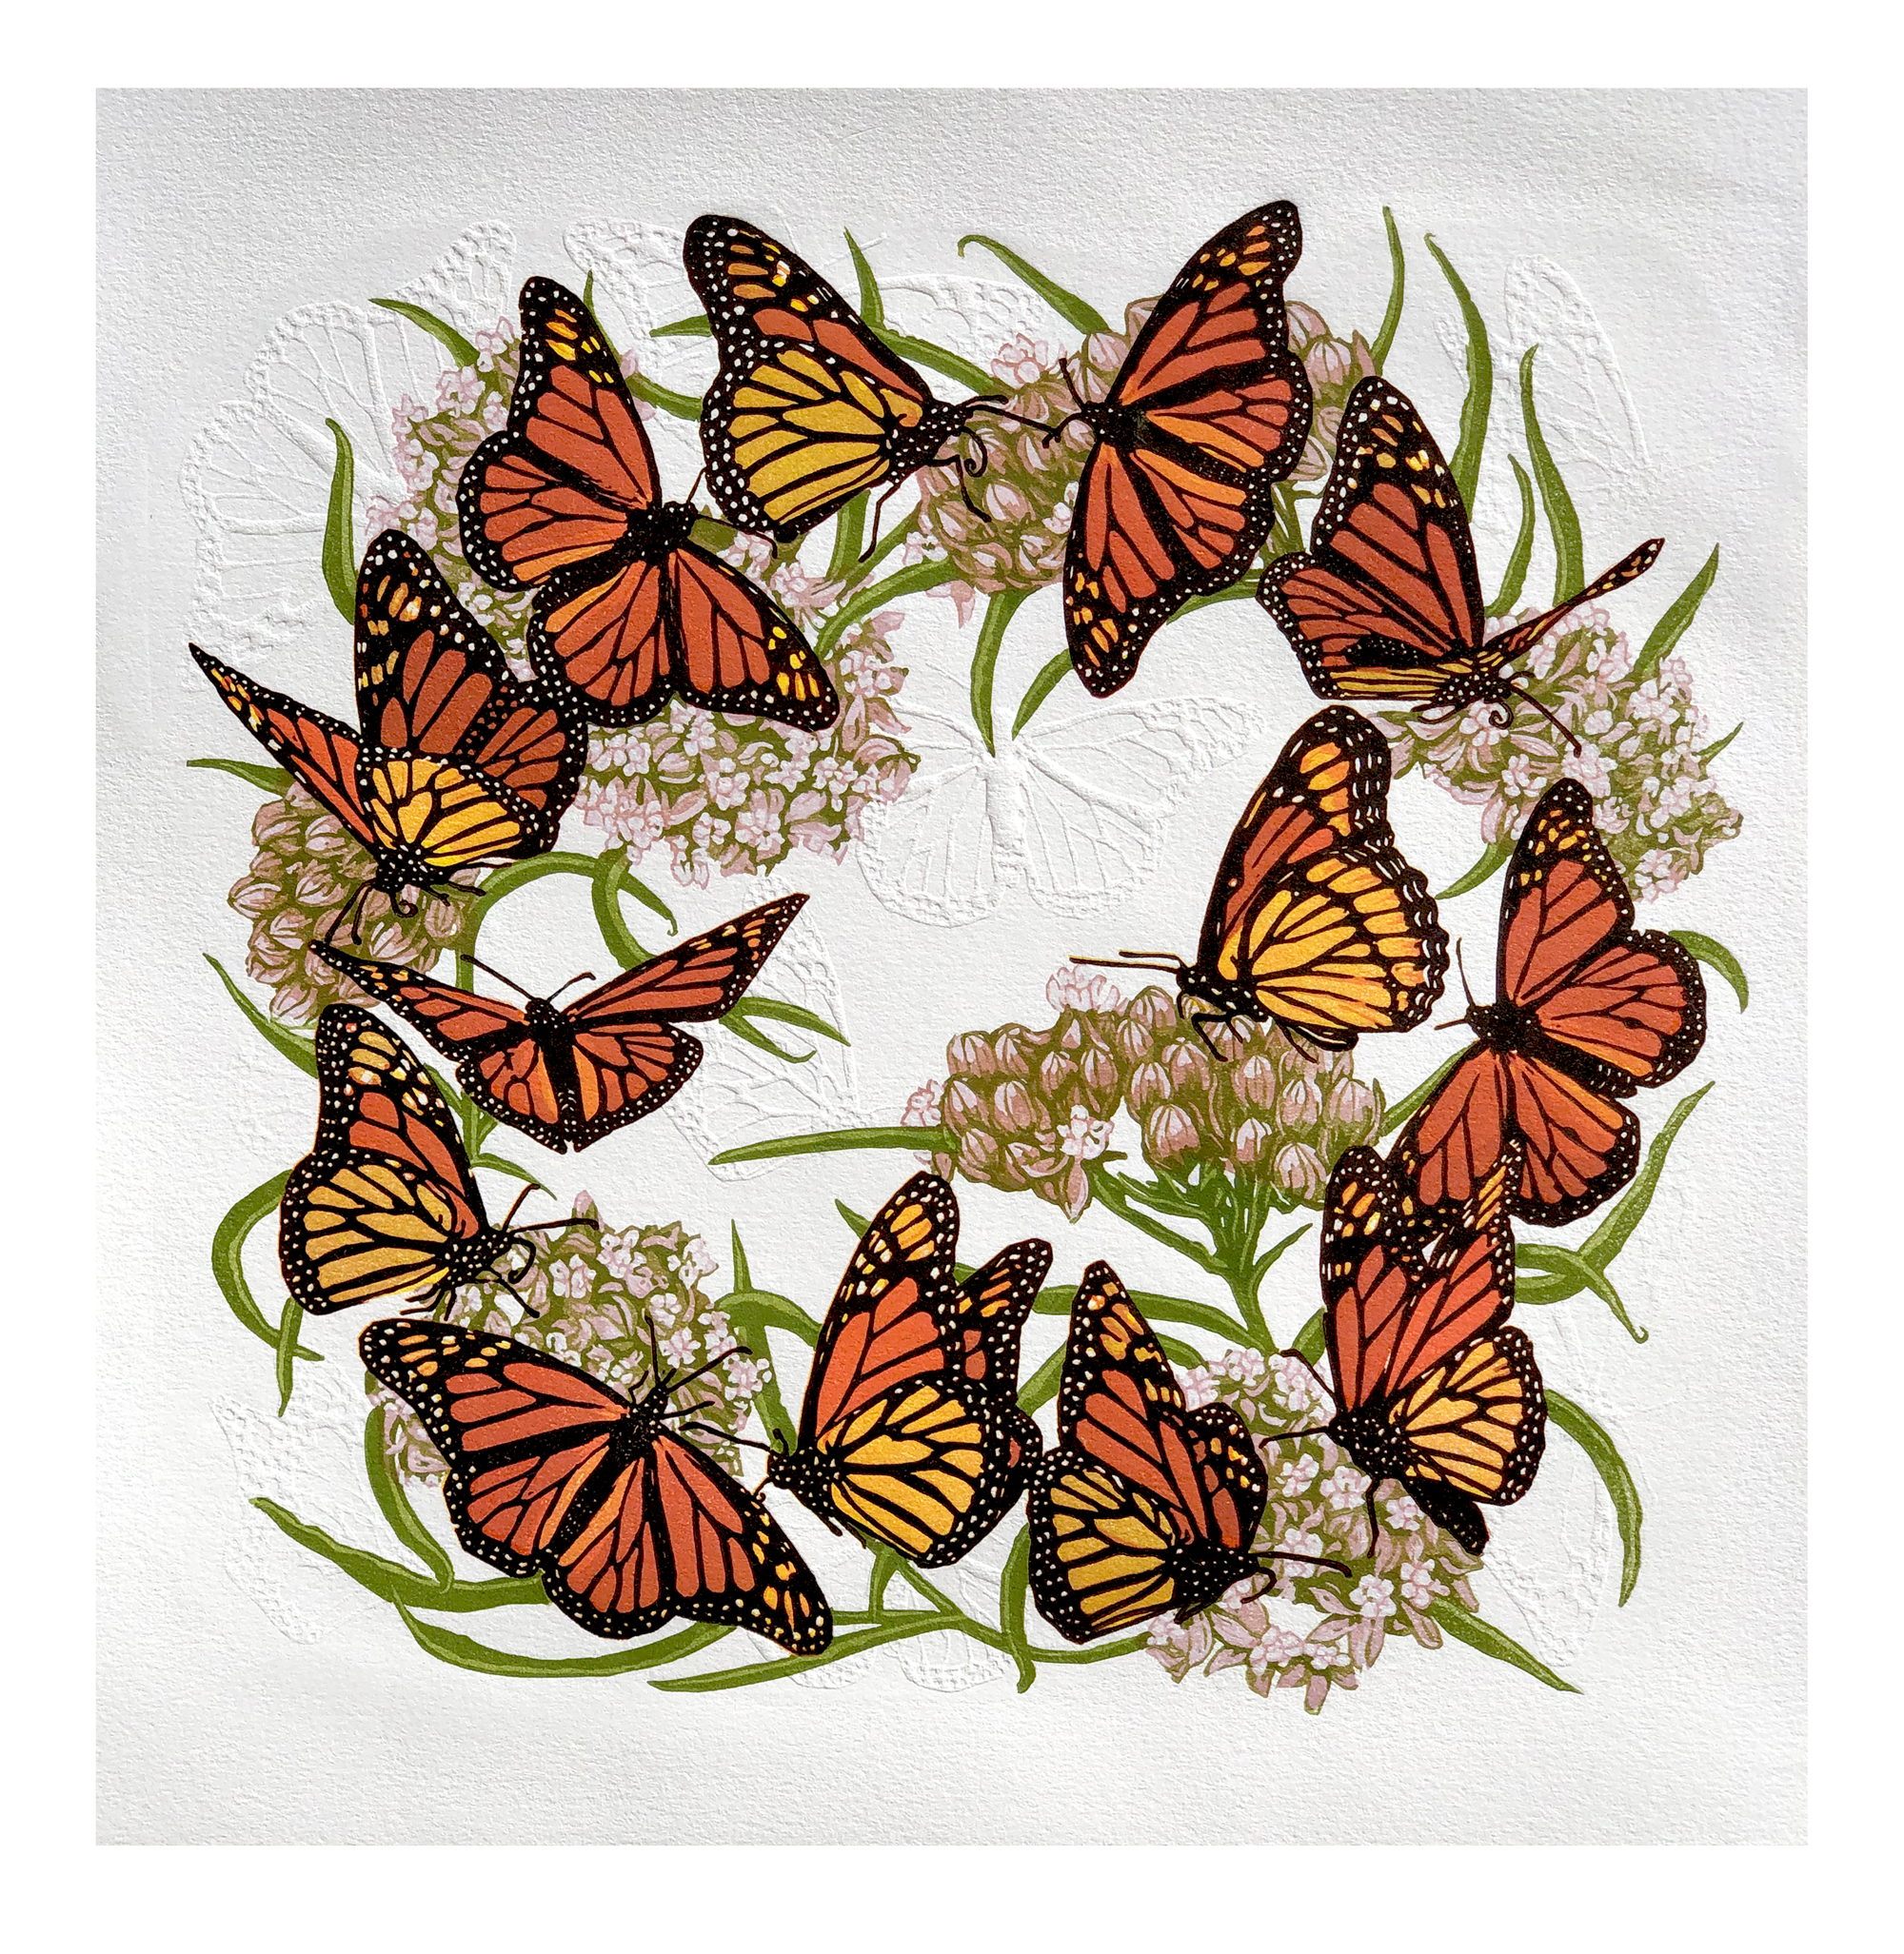 Twelve Monarchs and a Viceroy